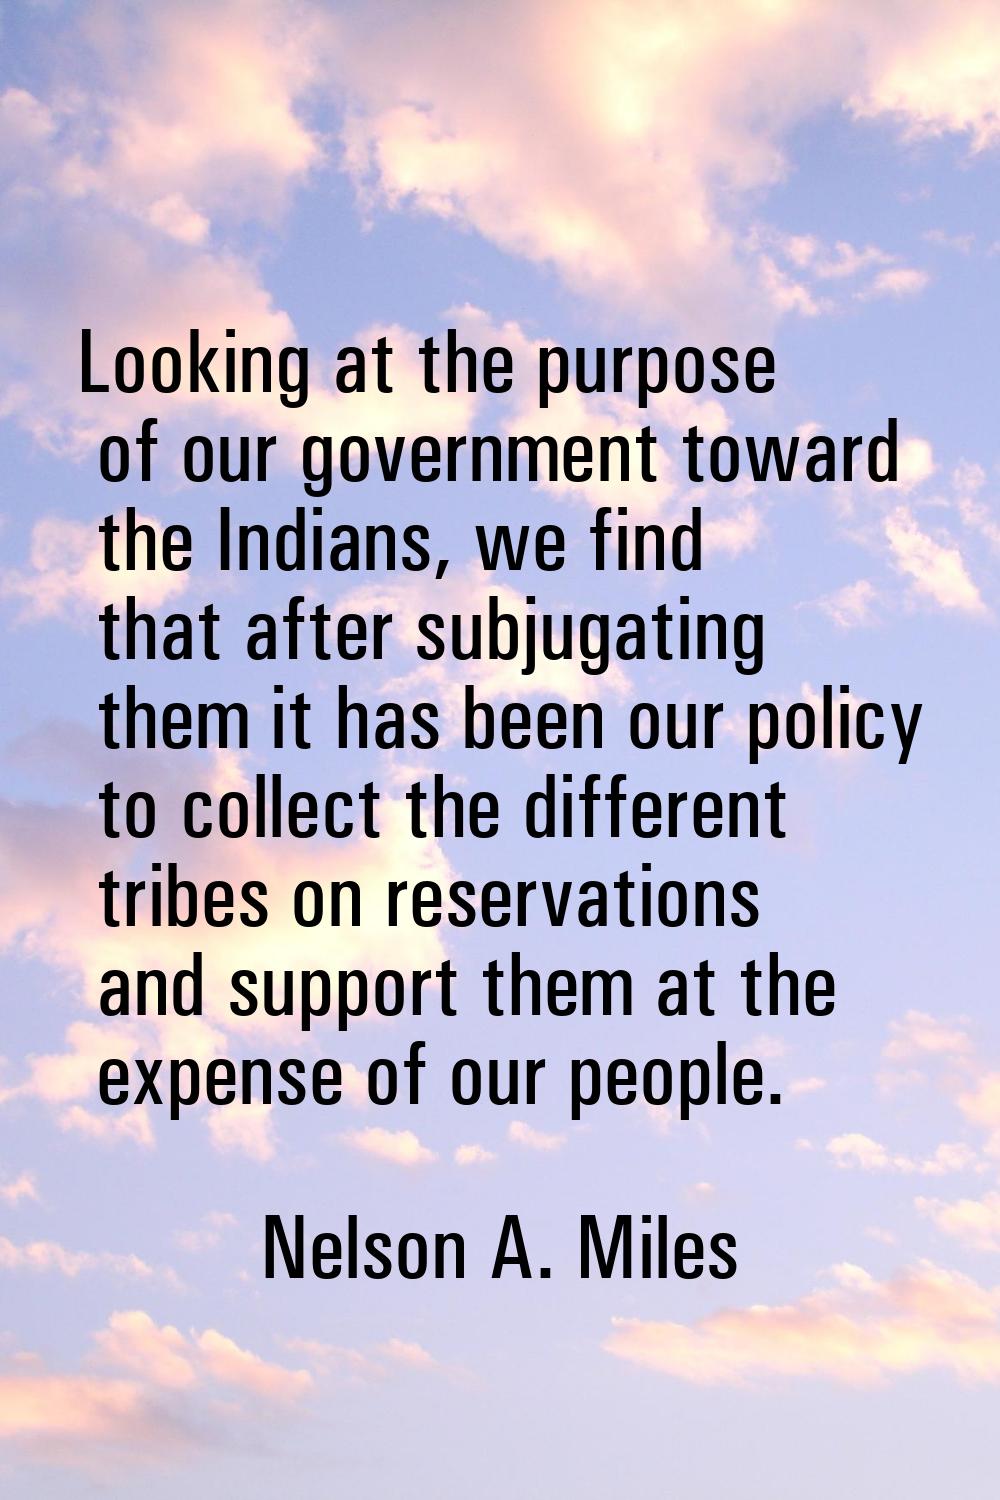 Looking at the purpose of our government toward the Indians, we find that after subjugating them it